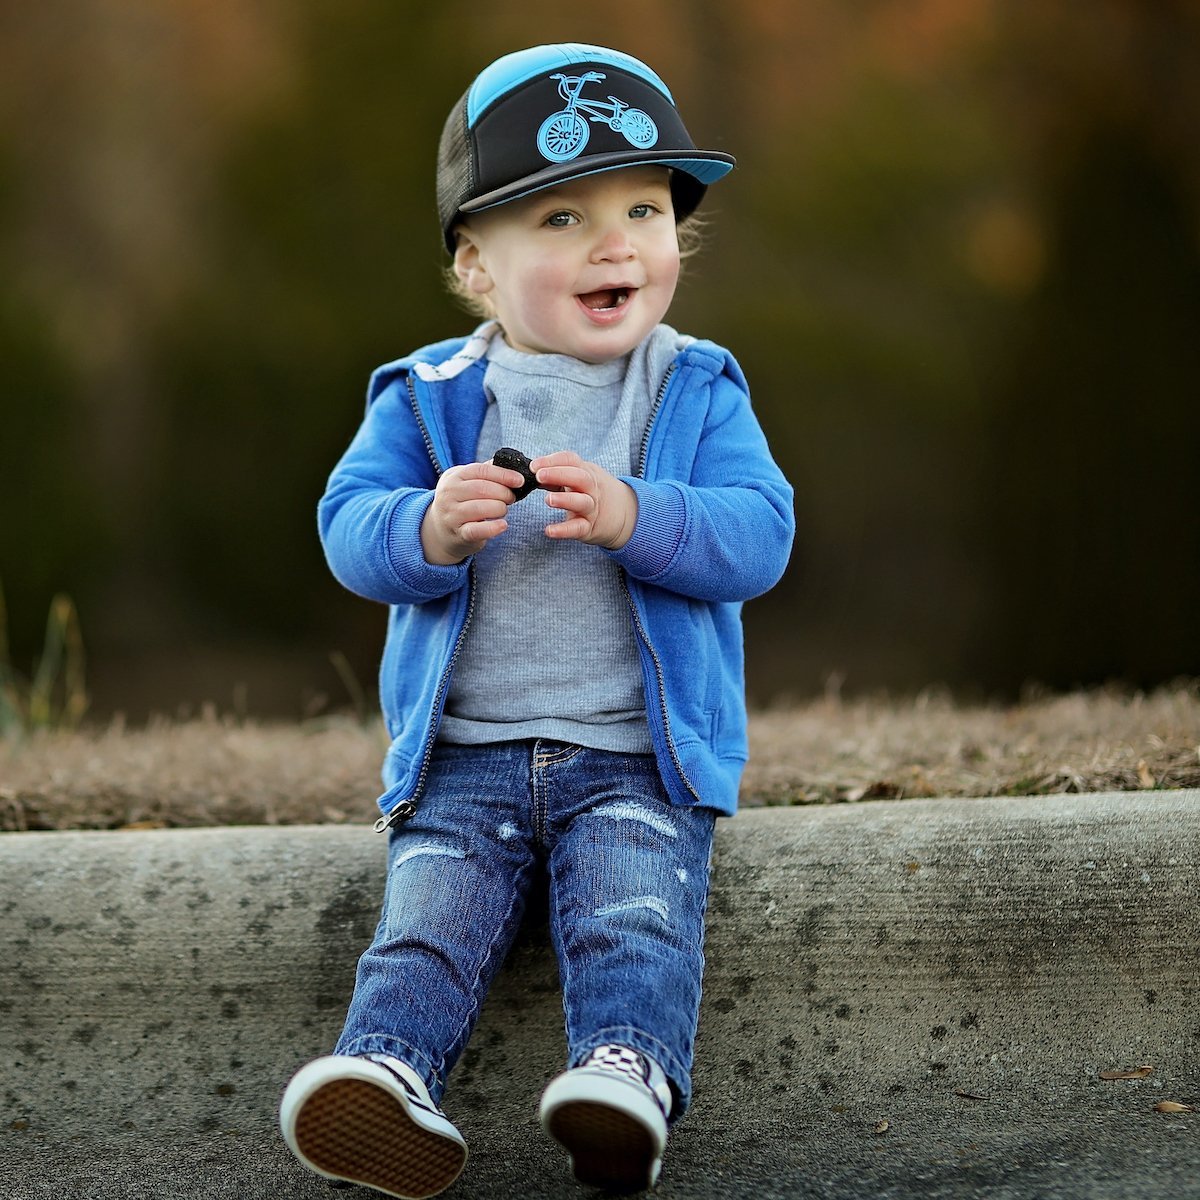 Shop online for our best selling snapback hats from LB Threads for baby, toddler, and kid. Model wearing the LB Threads BMX hat, a black and blue 7-panel trucker snapback hat.